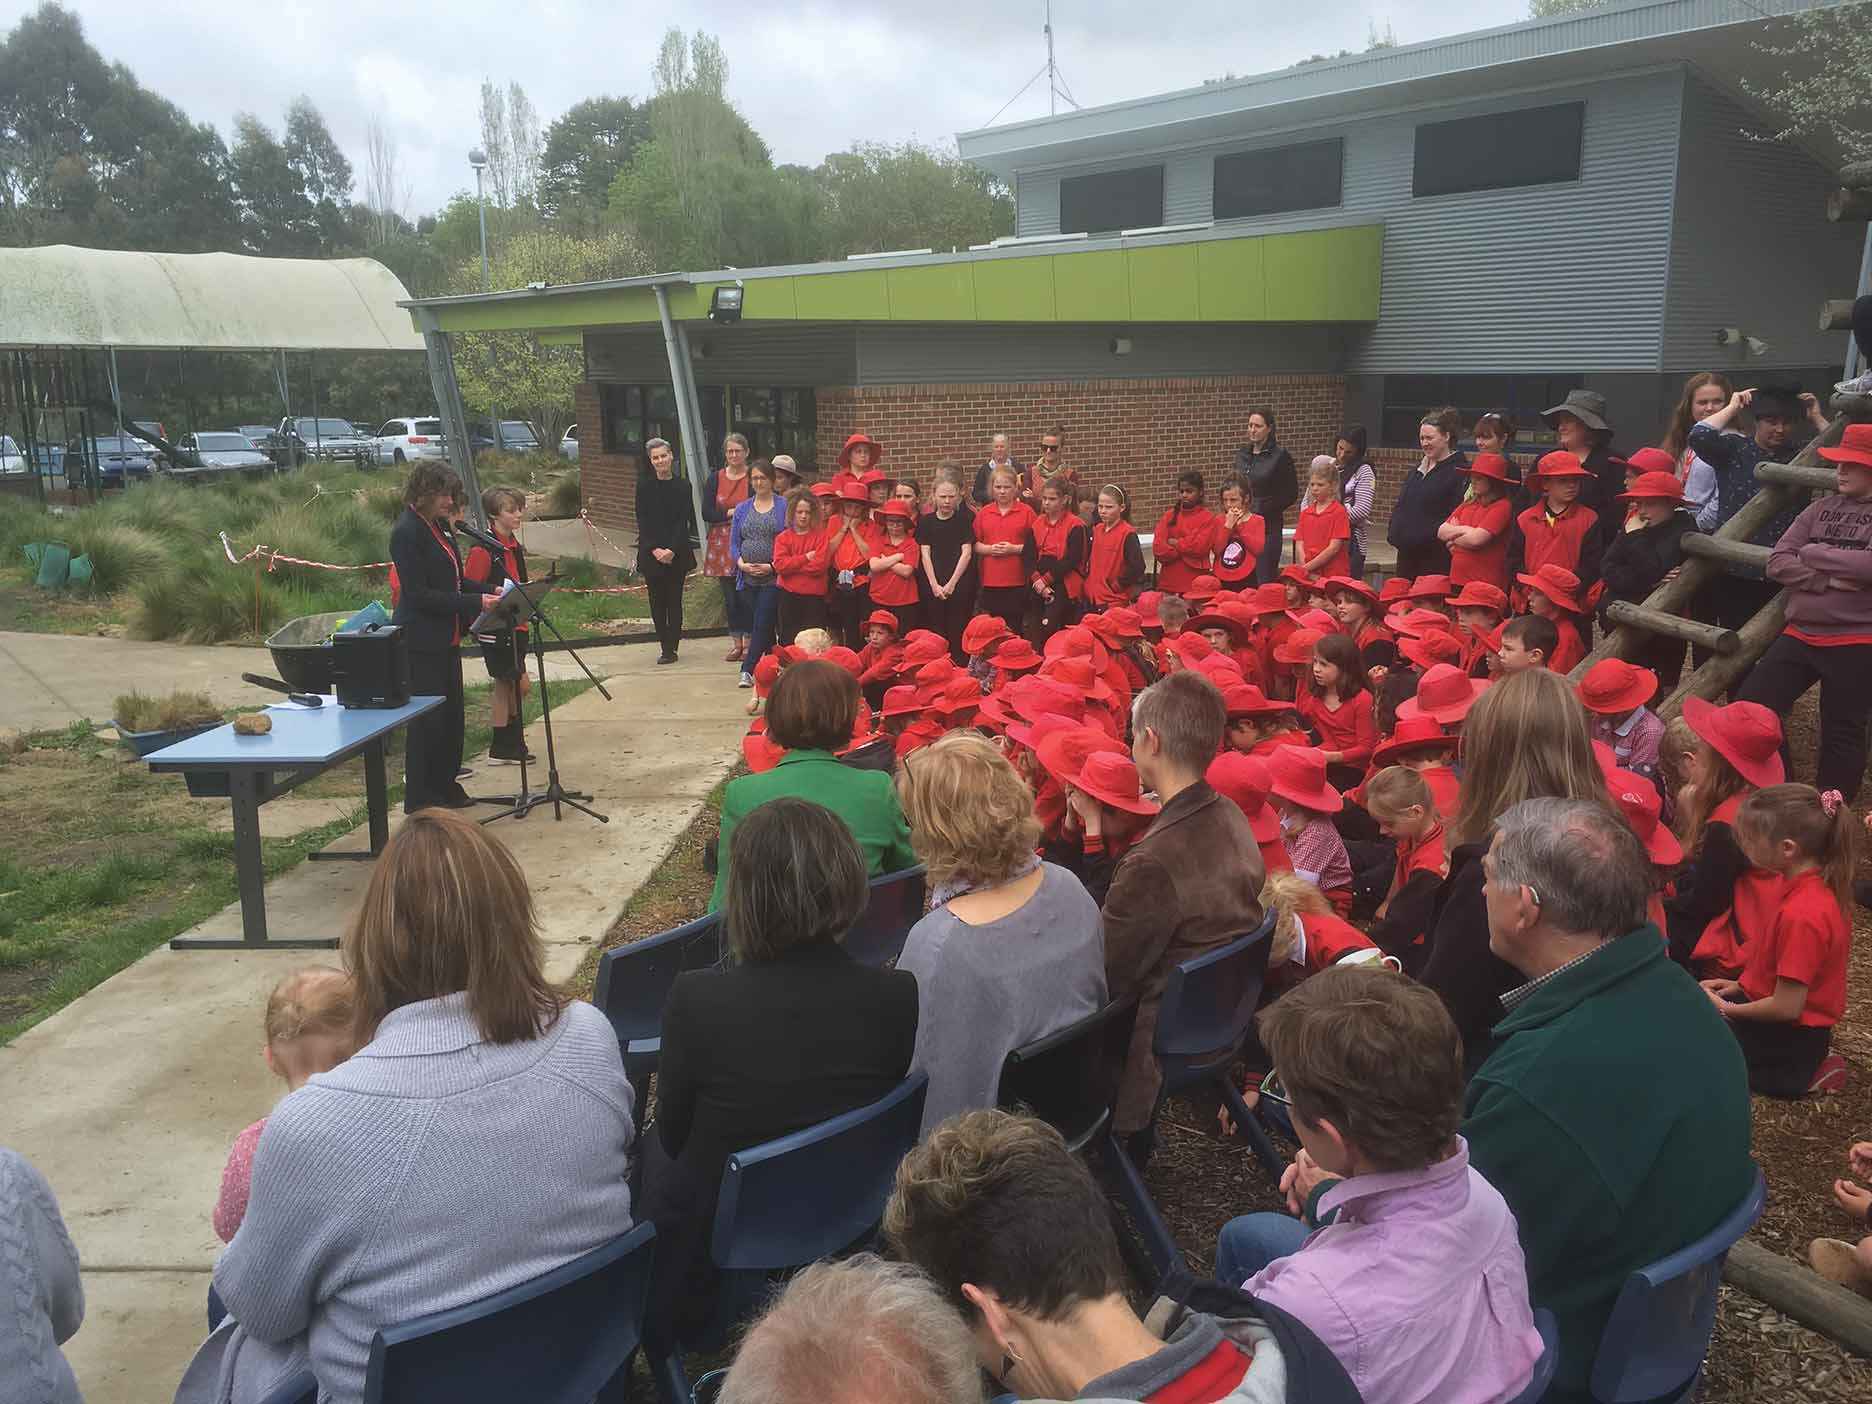 The whole of the Newham Primary School community gathered to hear about the benefits of providing habitat and increasing biodiversity on frog bog day.